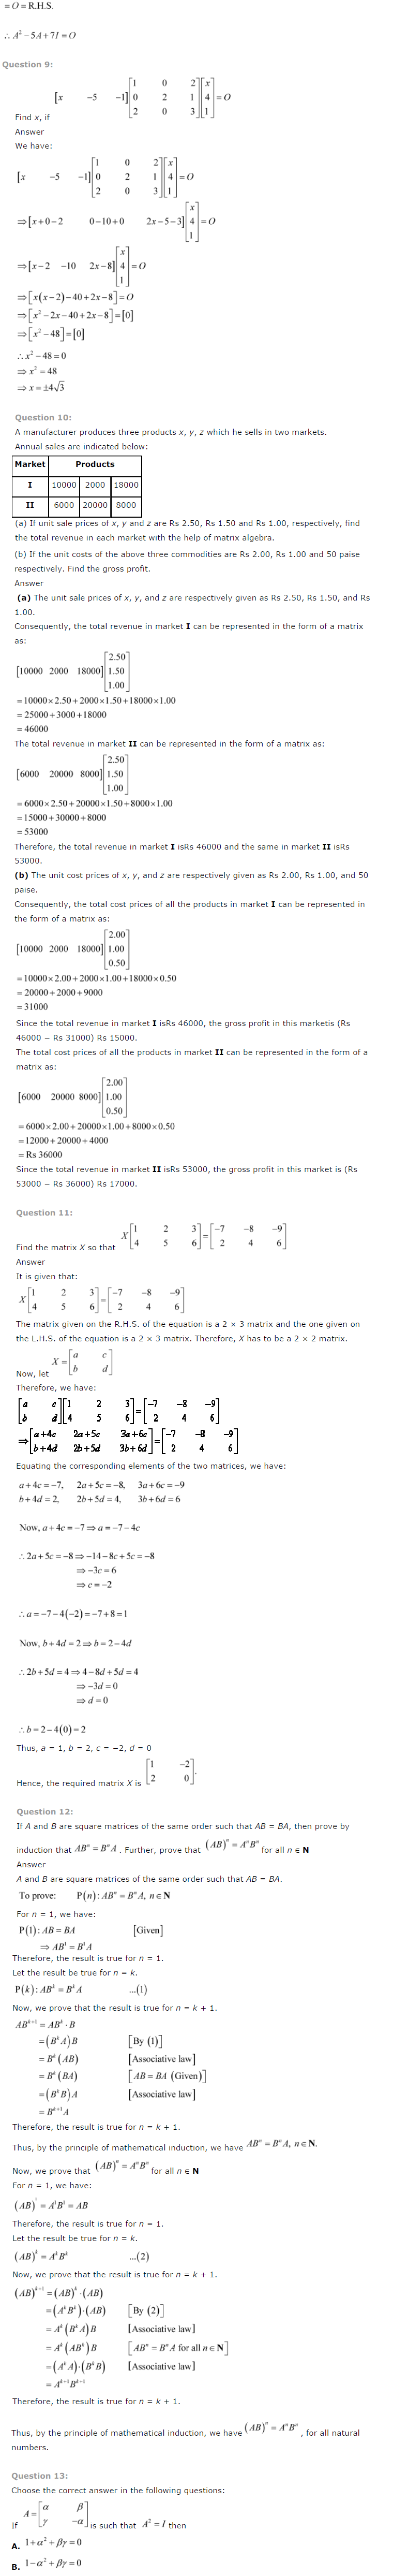 NCERT Solutions for Class 12 Maths Chapter 3 Matrices 13